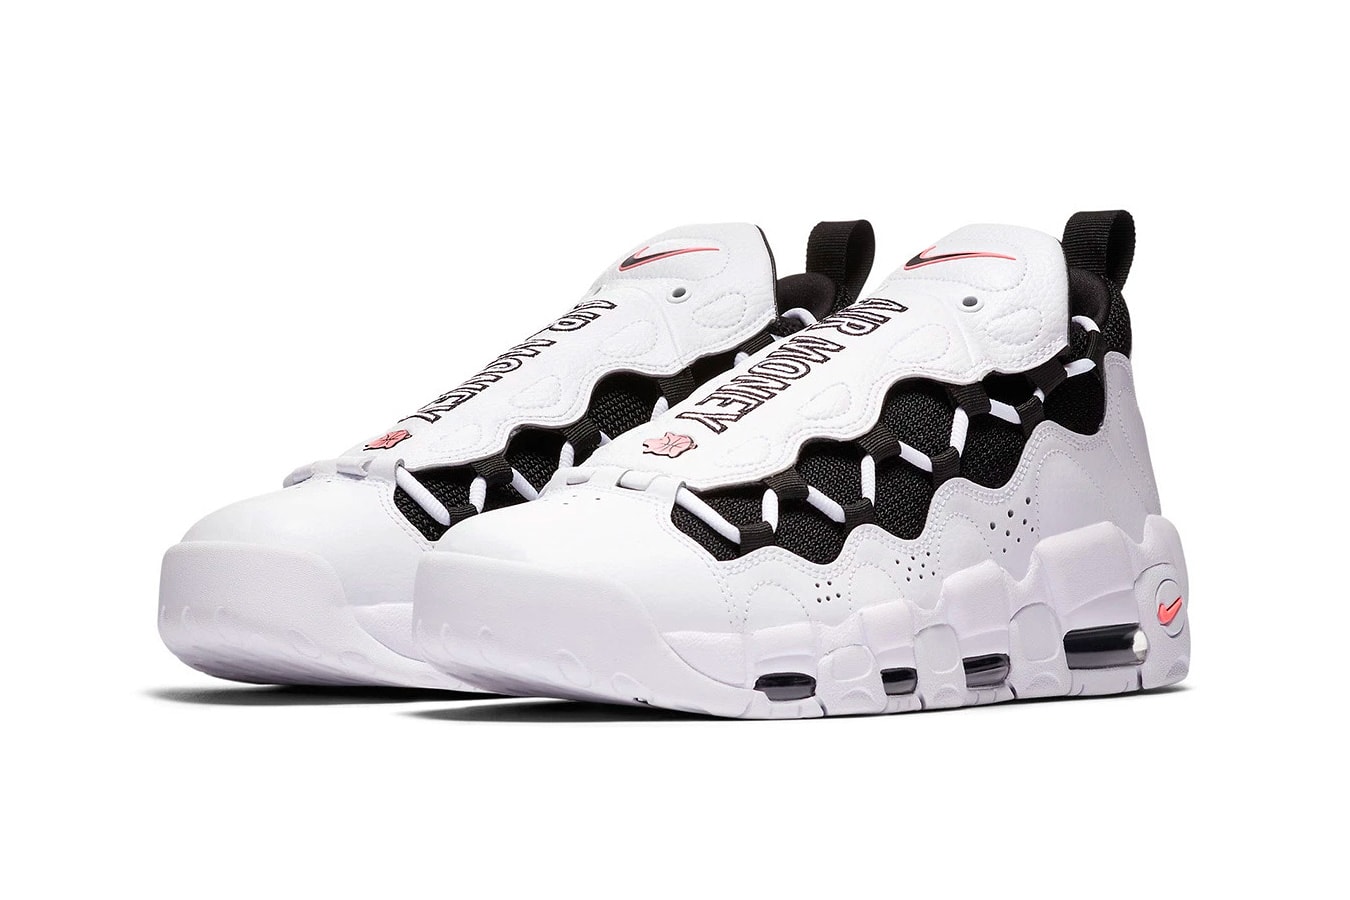 Nike Air More Money Piggy Bank Release Date sneakers price purchase white coral black